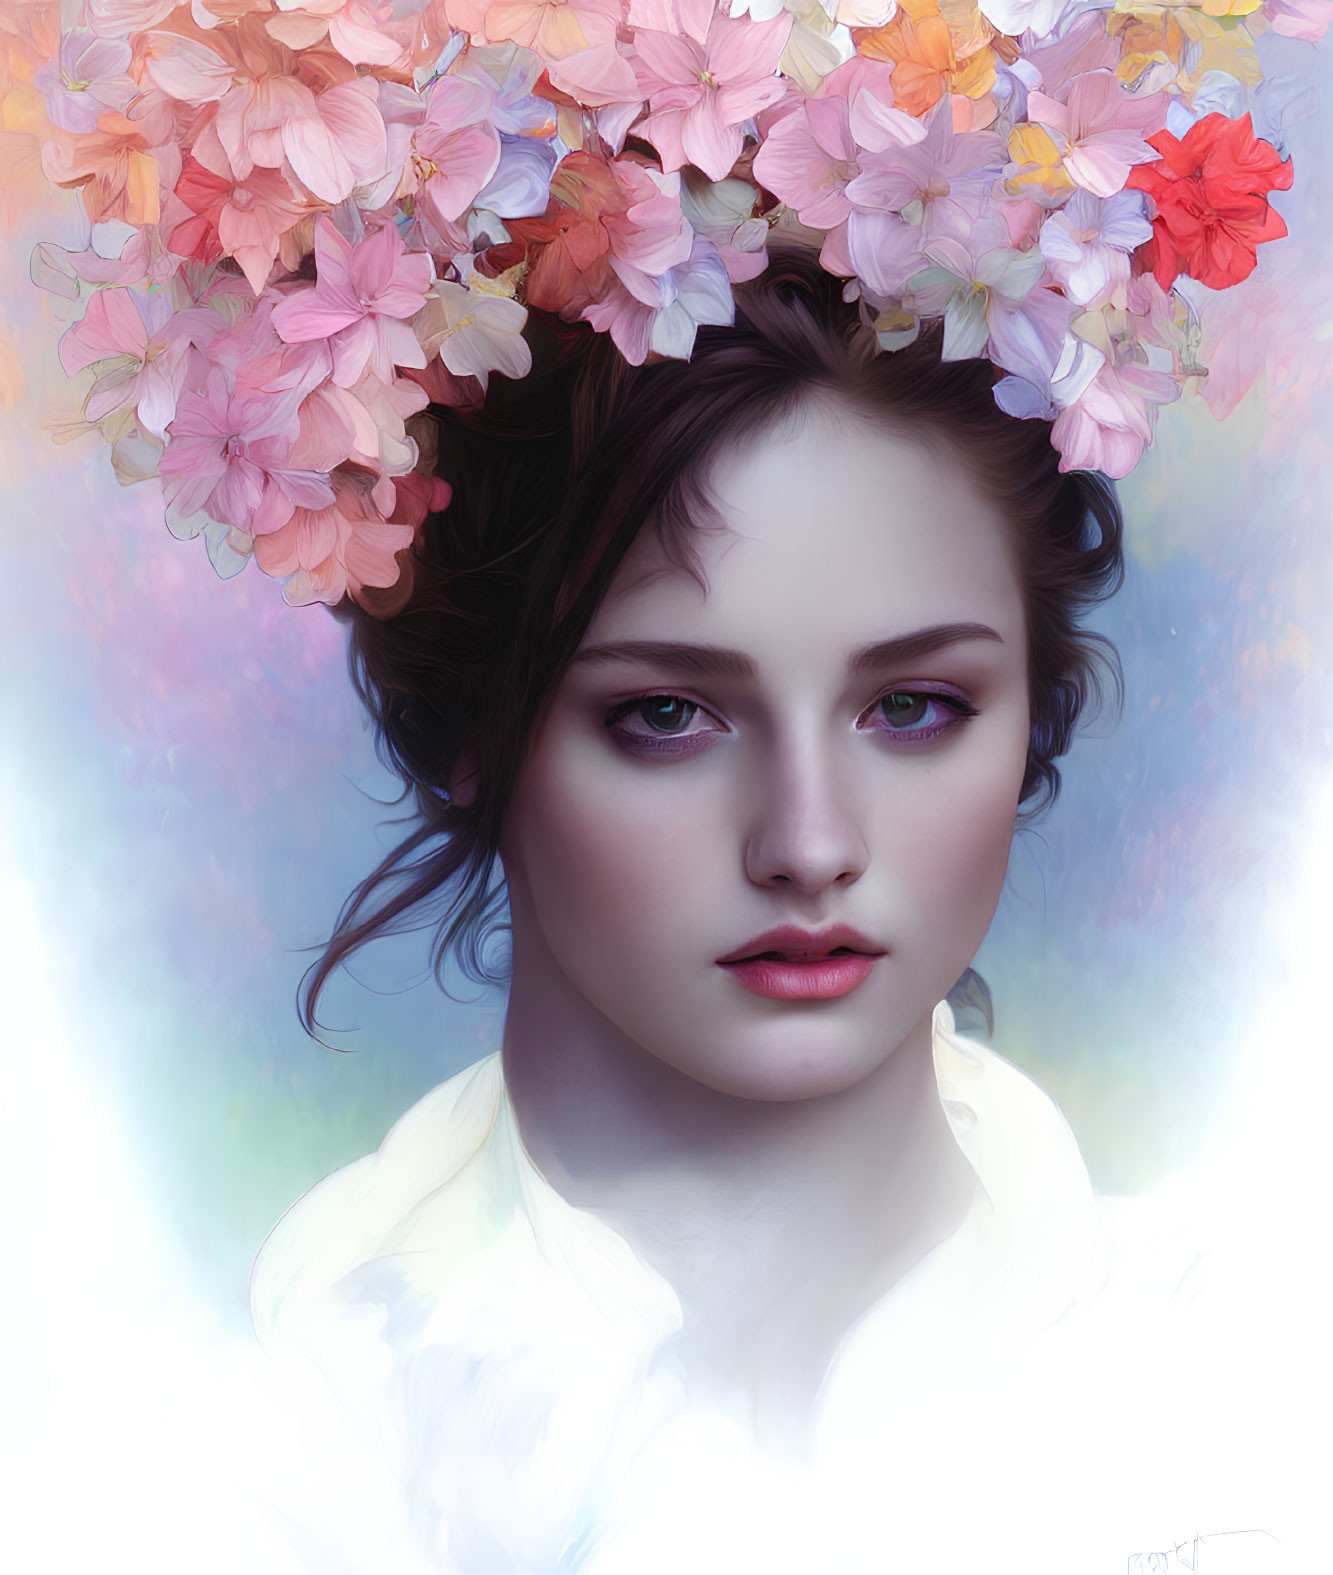 Serene woman portrait with multicolored flower crown